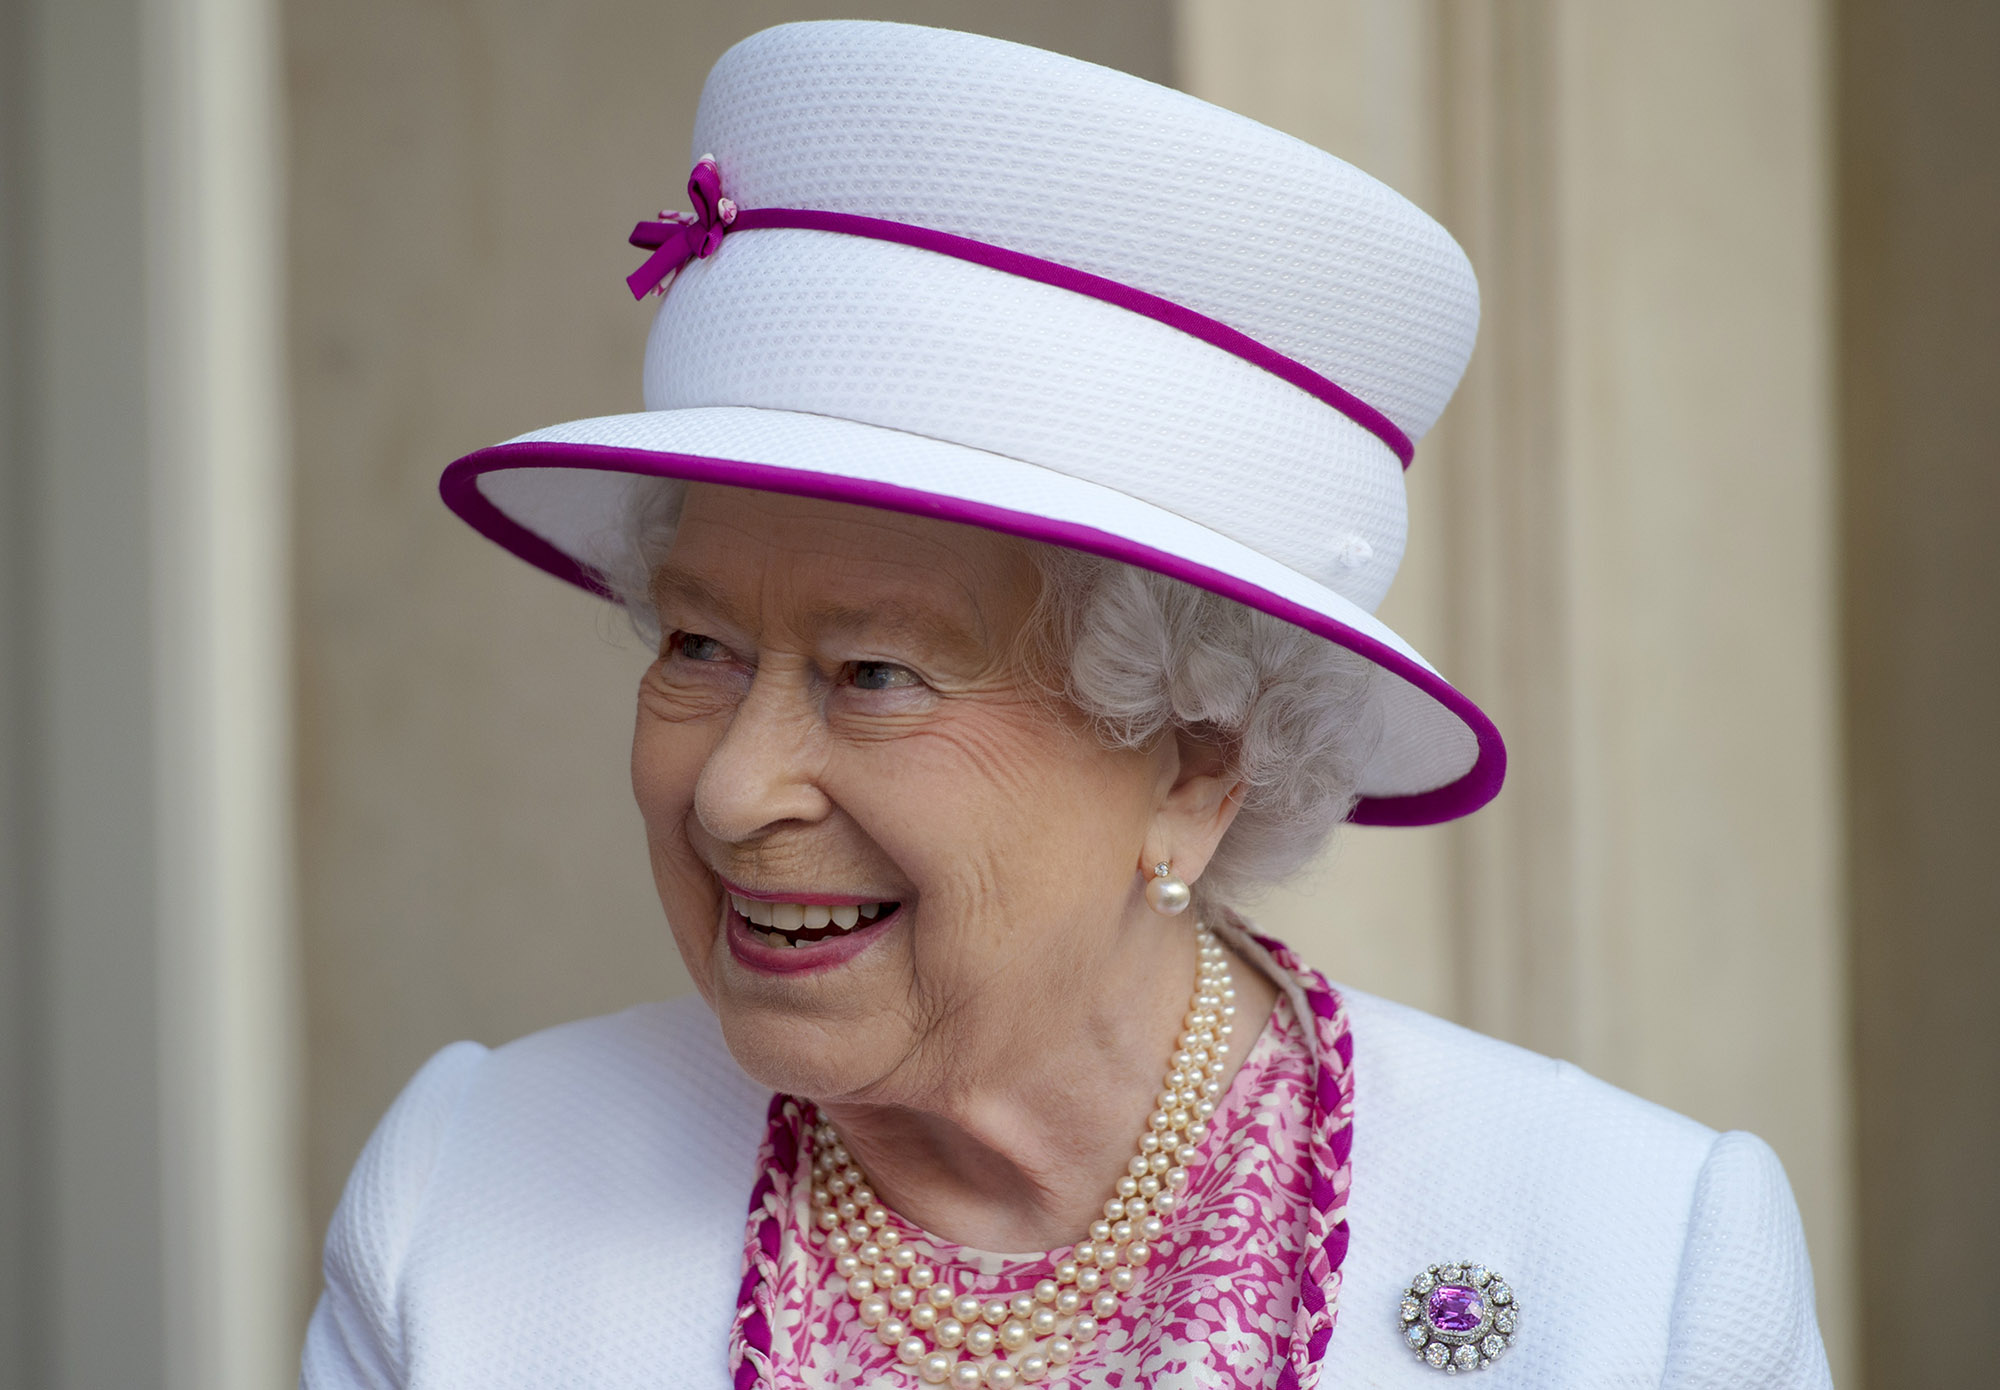 The Queen Visits Marlborough House To Launch The "Commonwealth Hub"